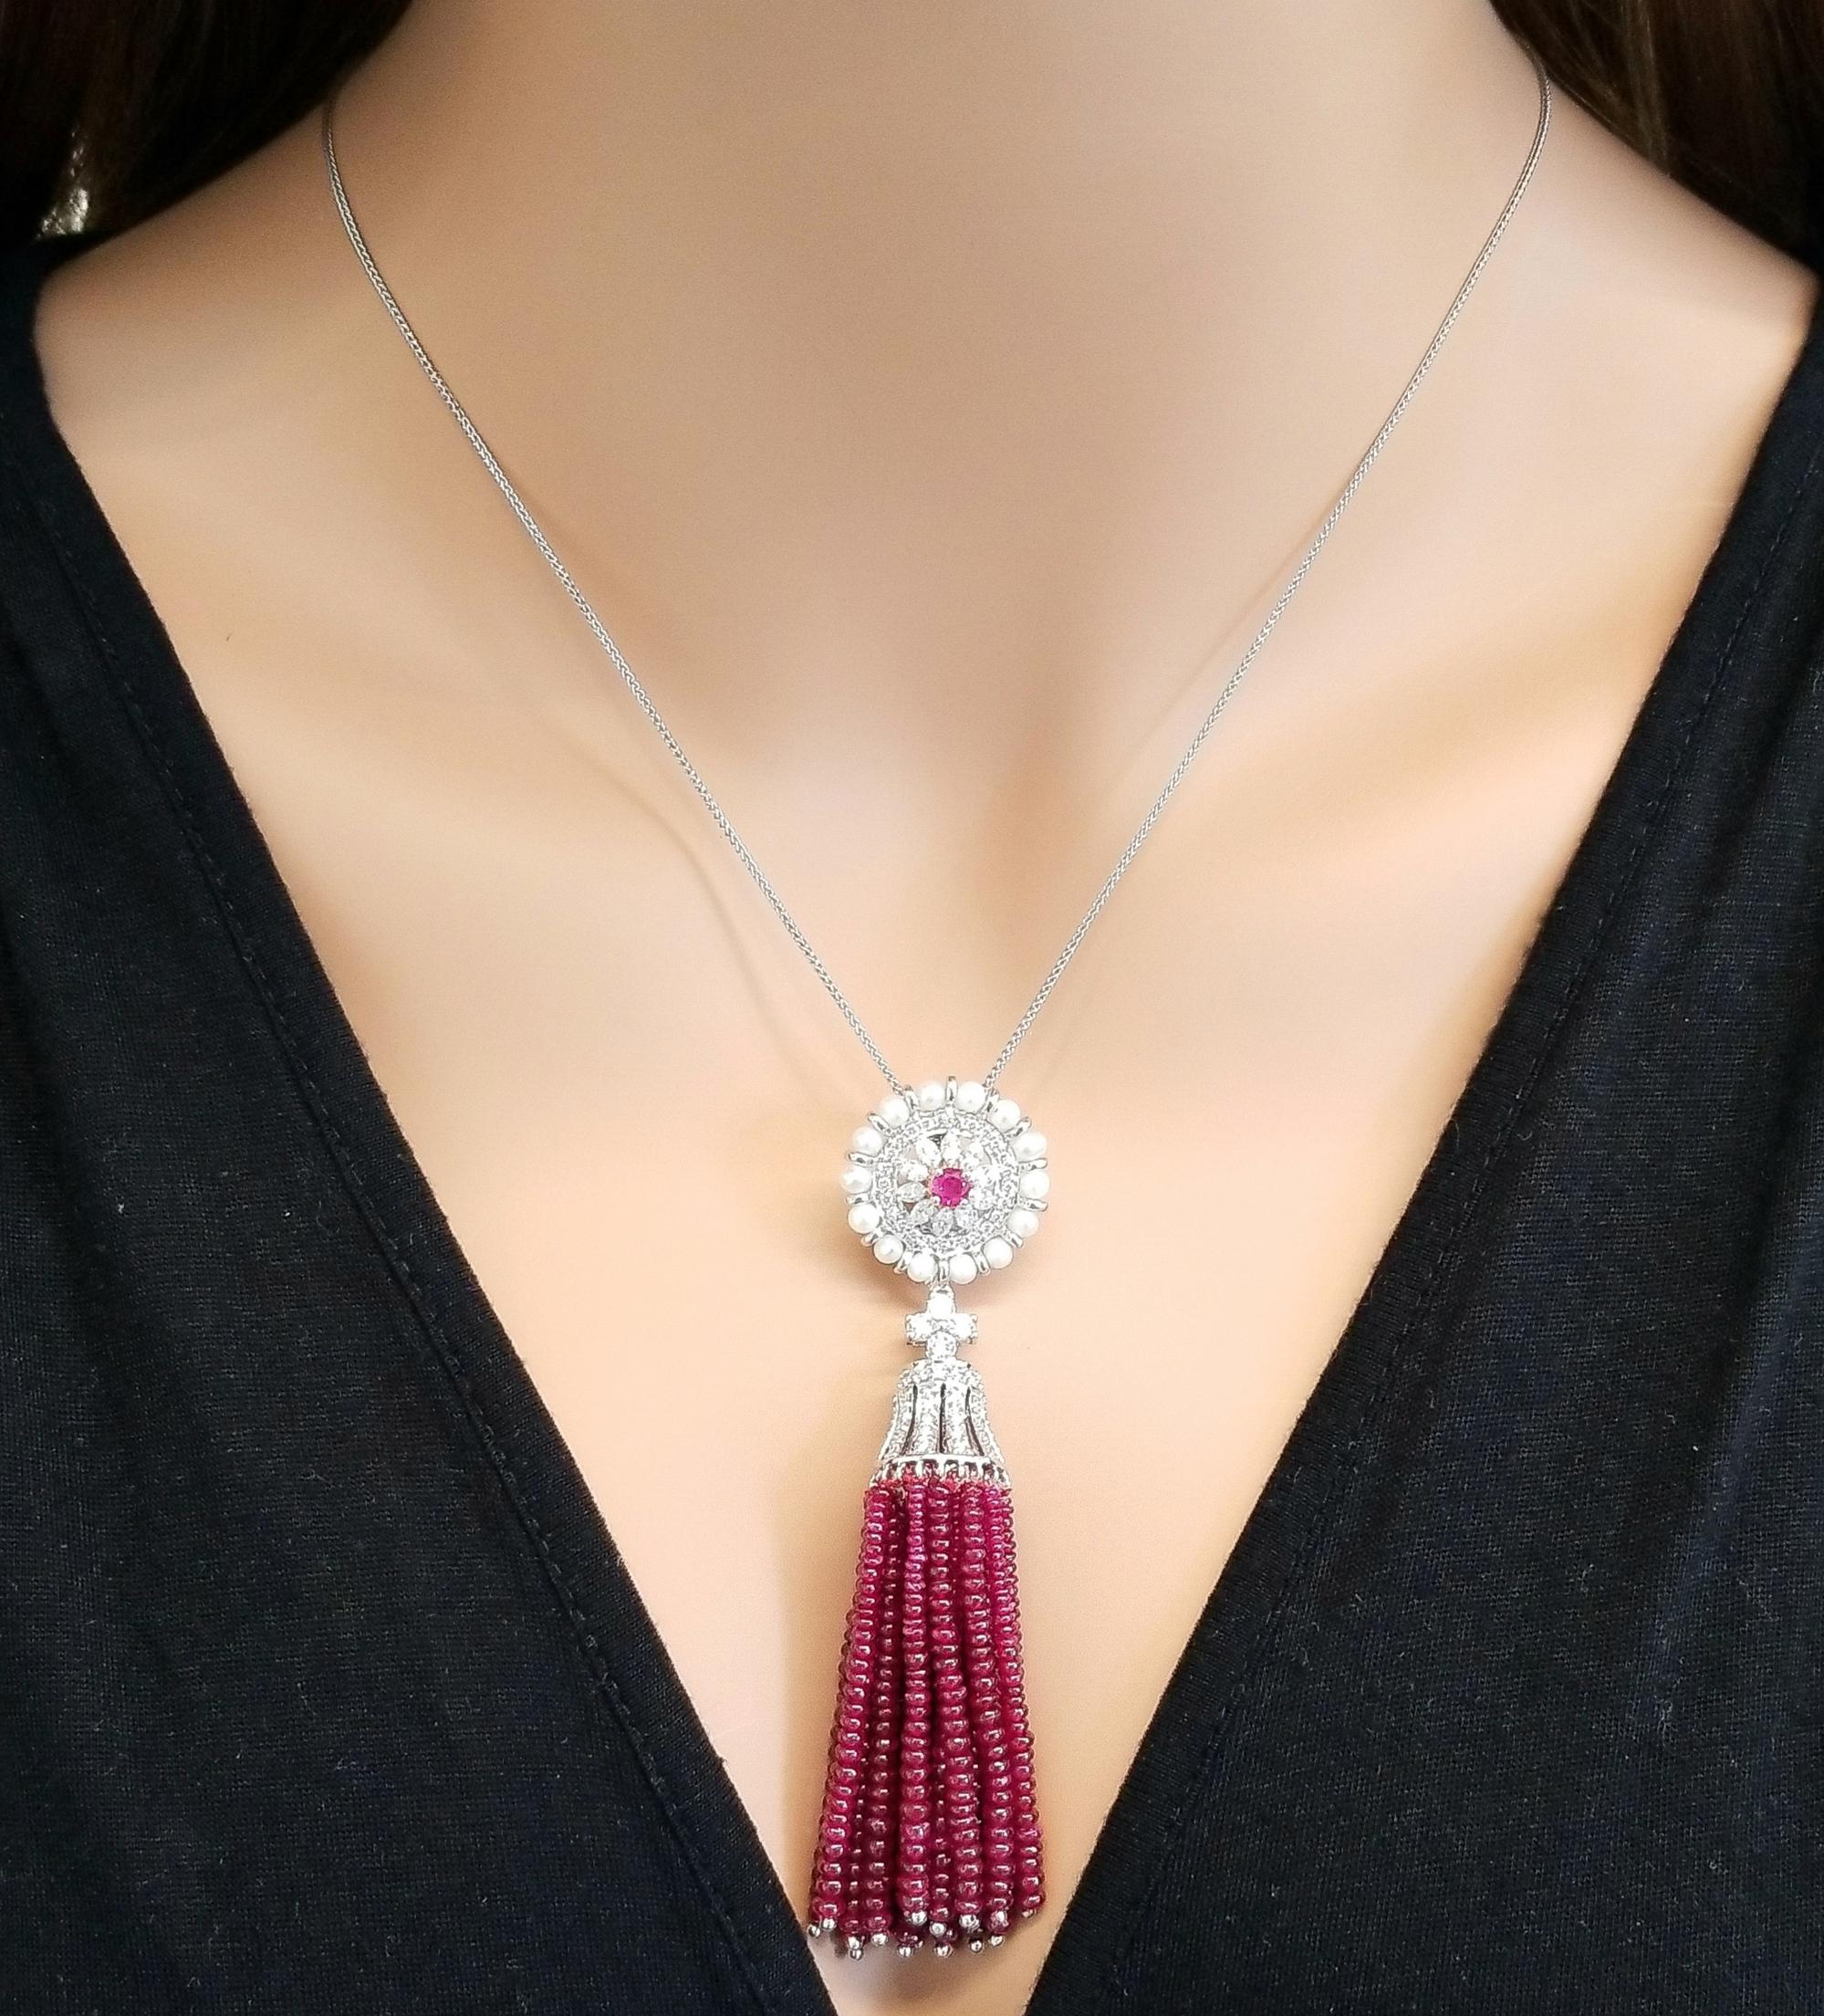 This pendant drips rubies. The ruby gem source is Thailand. 75.13 carats of ruby beads tassle is significant. Its blood red color is sought after and is perfectly, precisely matched. A total of 1.98 carats of sparkling round brilliant cut diamonds